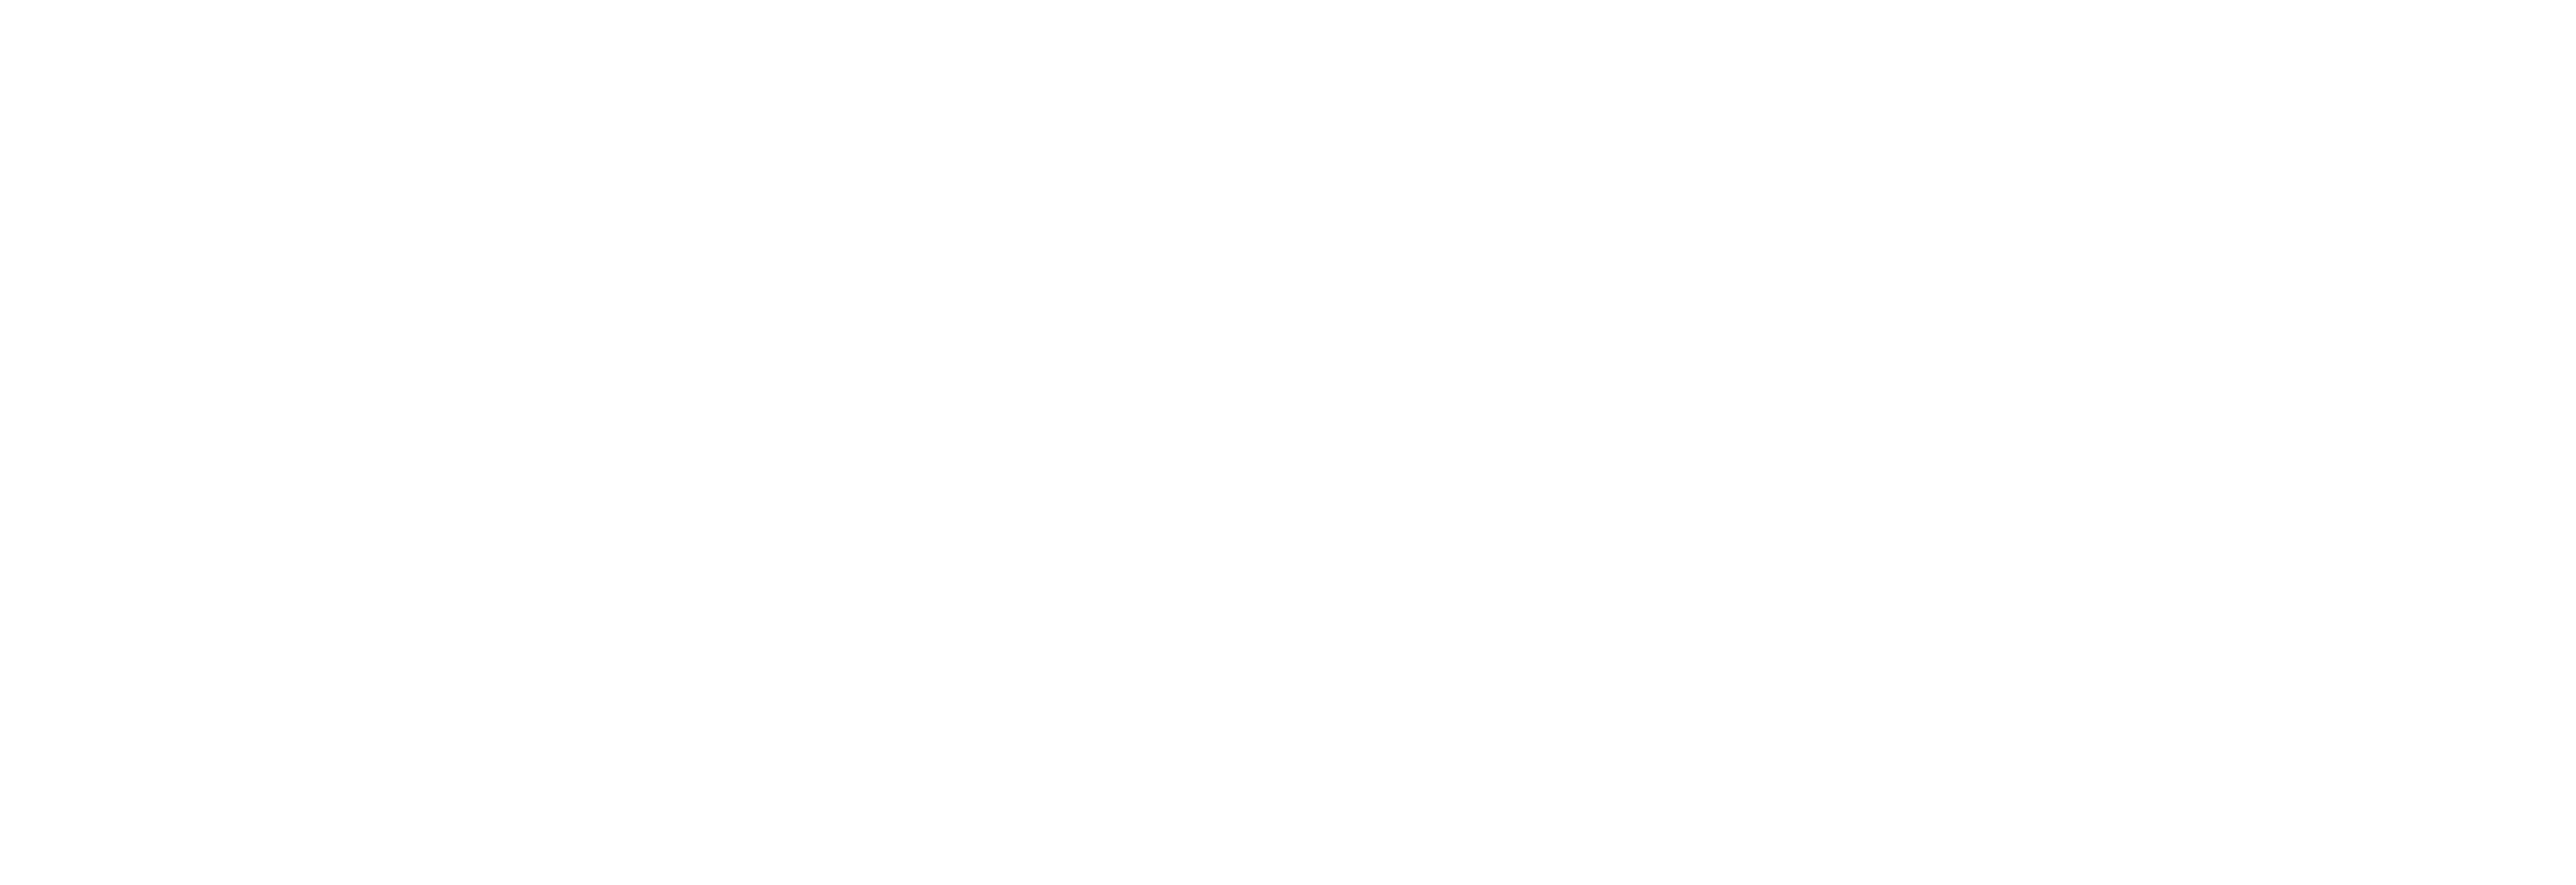 Off The Track